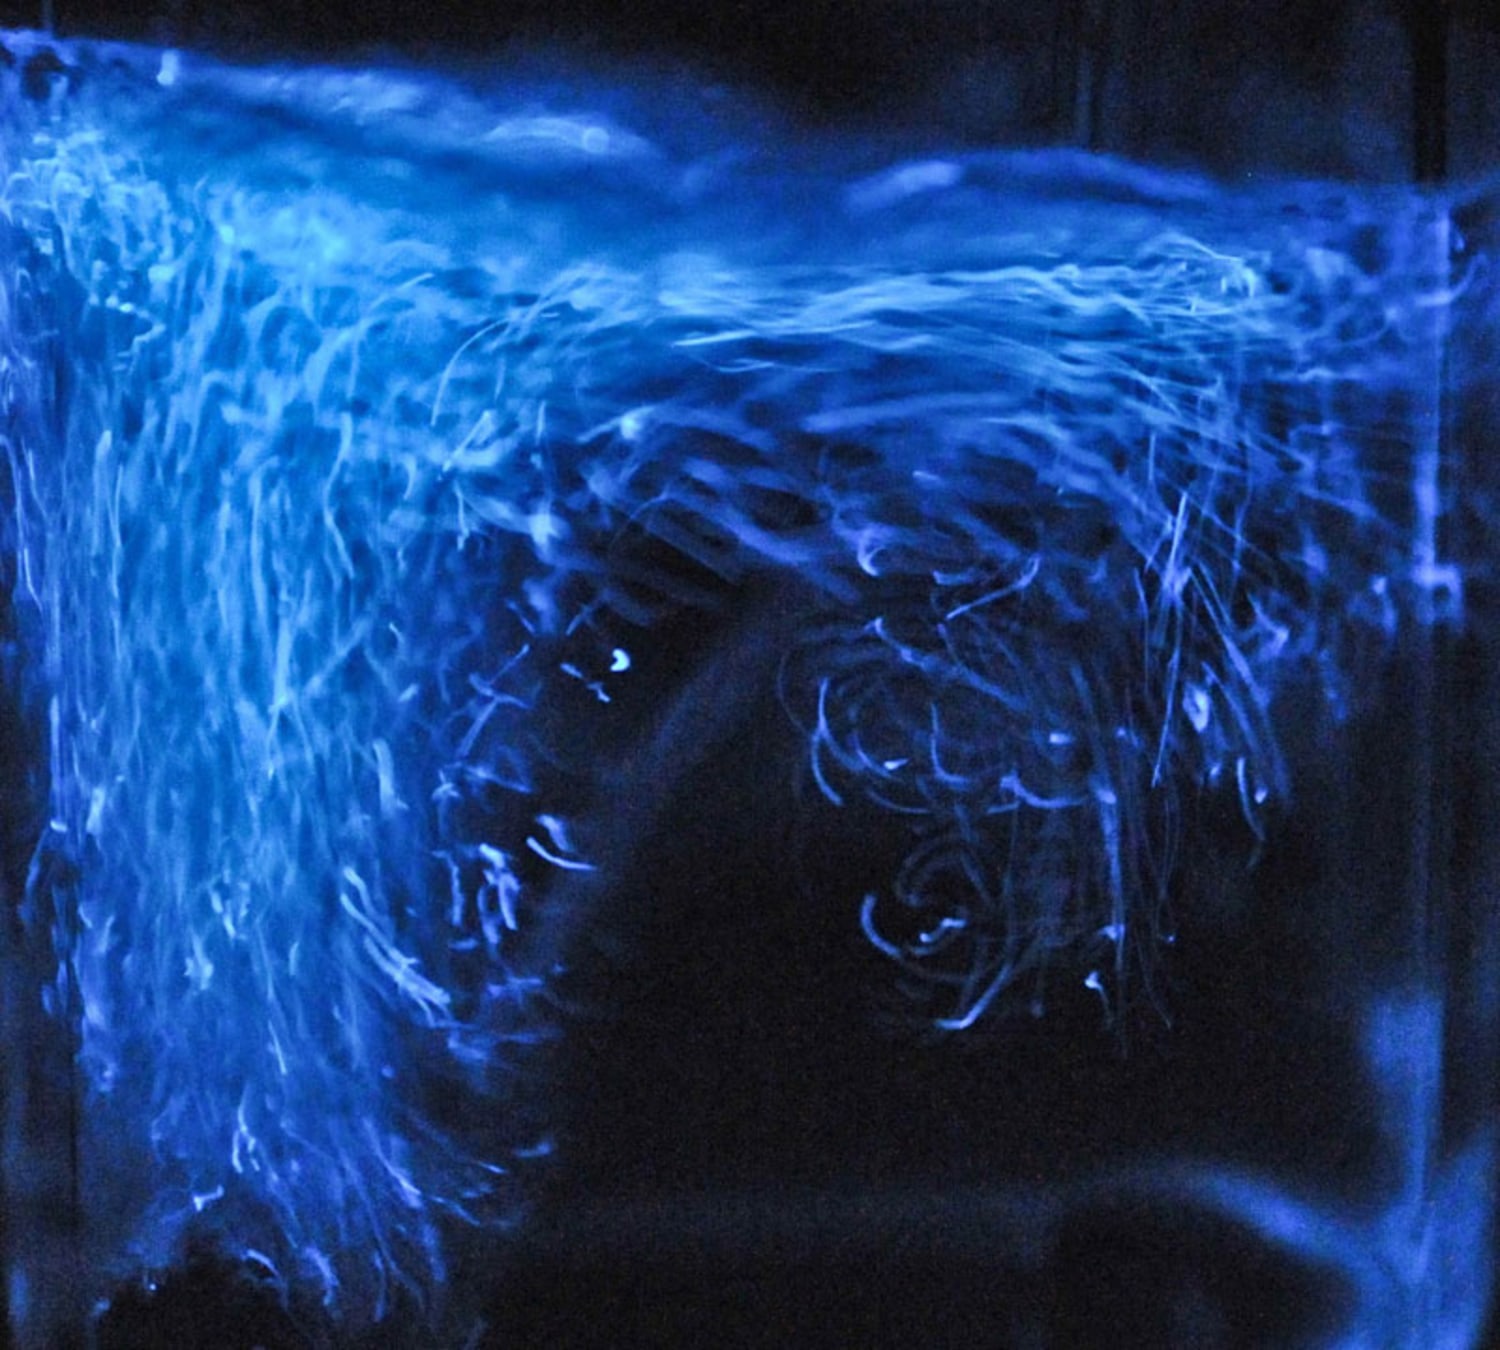 More Mammals Can Glow in the Dark Than Previously Thought